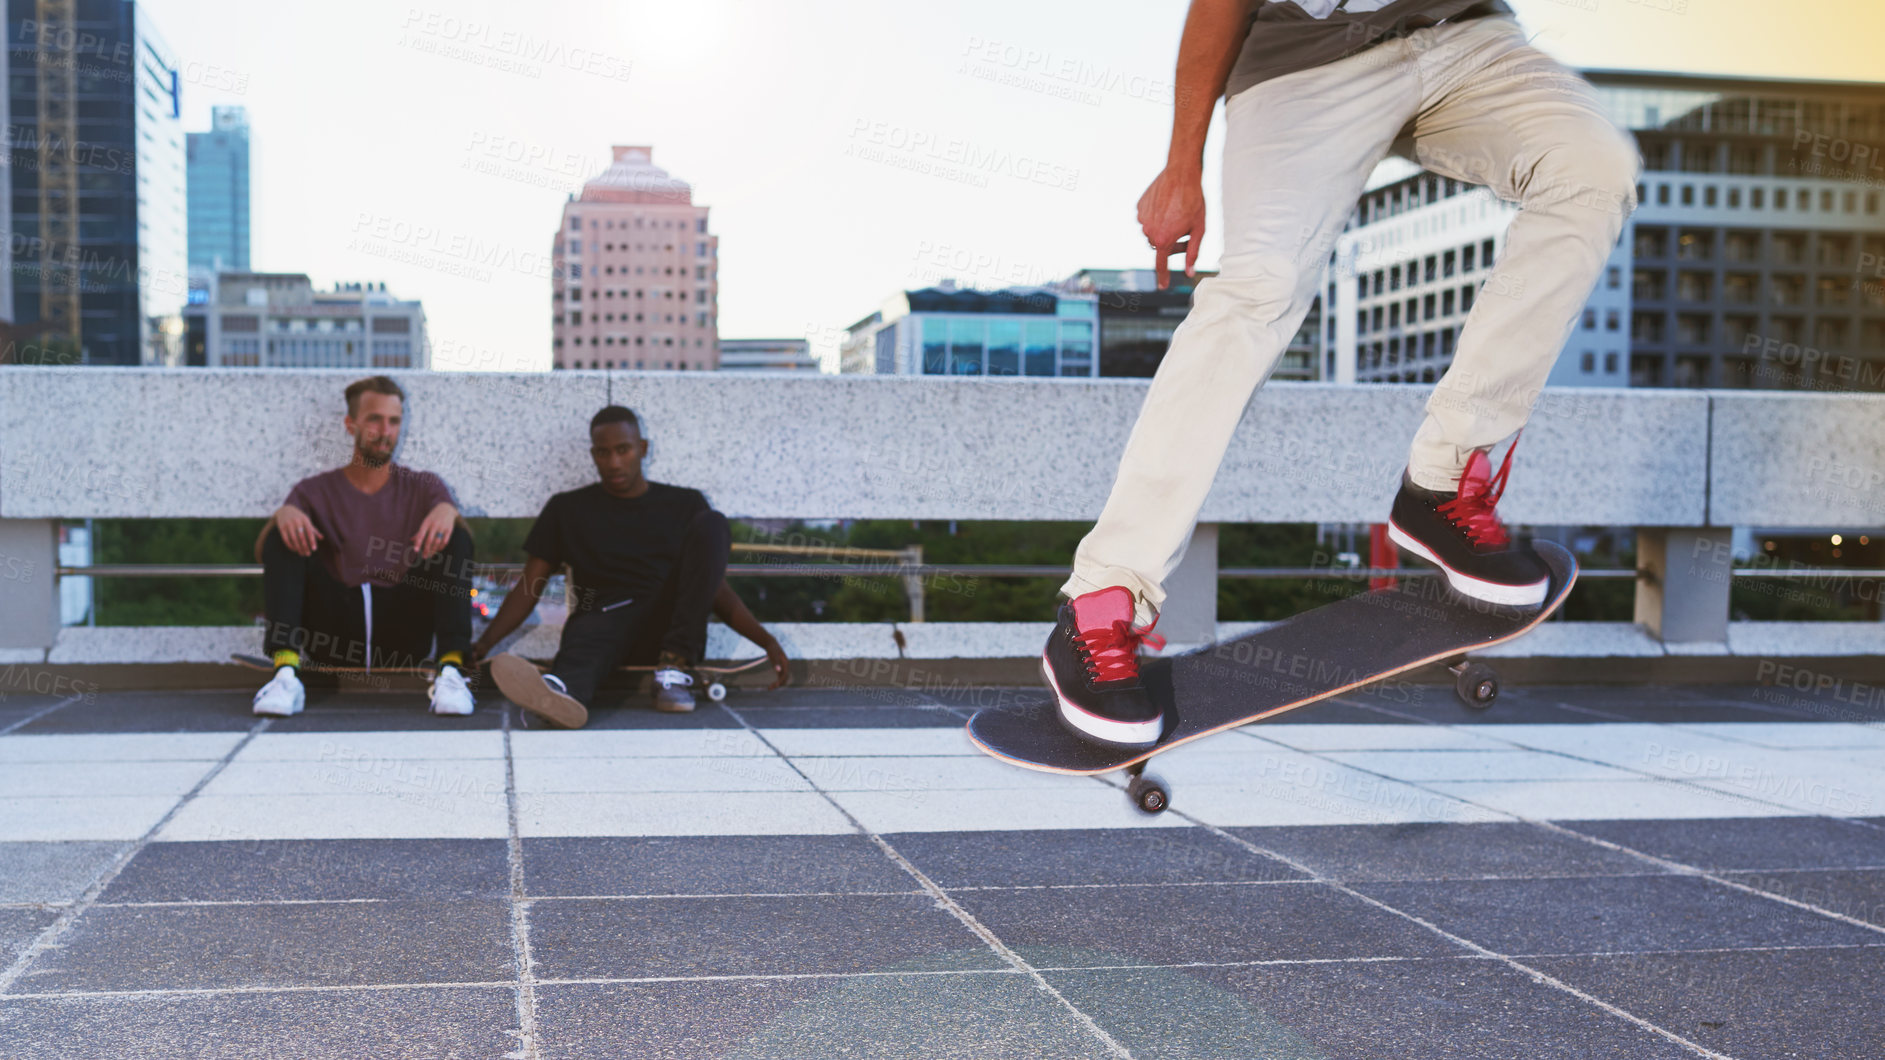 Buy stock photo Shot of a young man doing tricks on his skateboard while his friends looks on